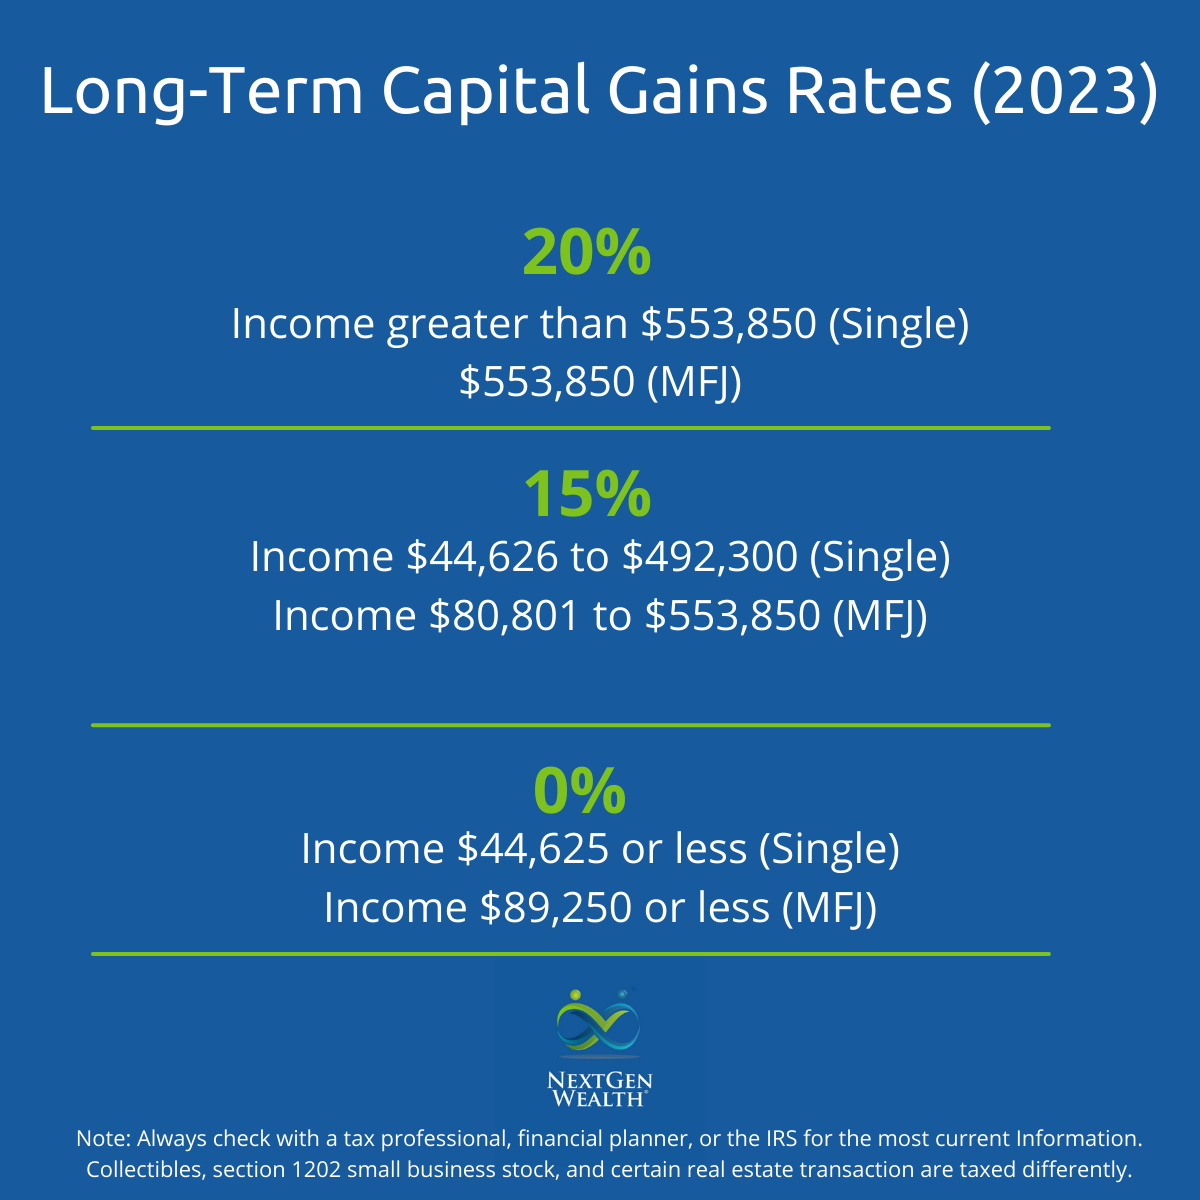 Can Capital Gains Push Me Into a Higher Tax Bracket?